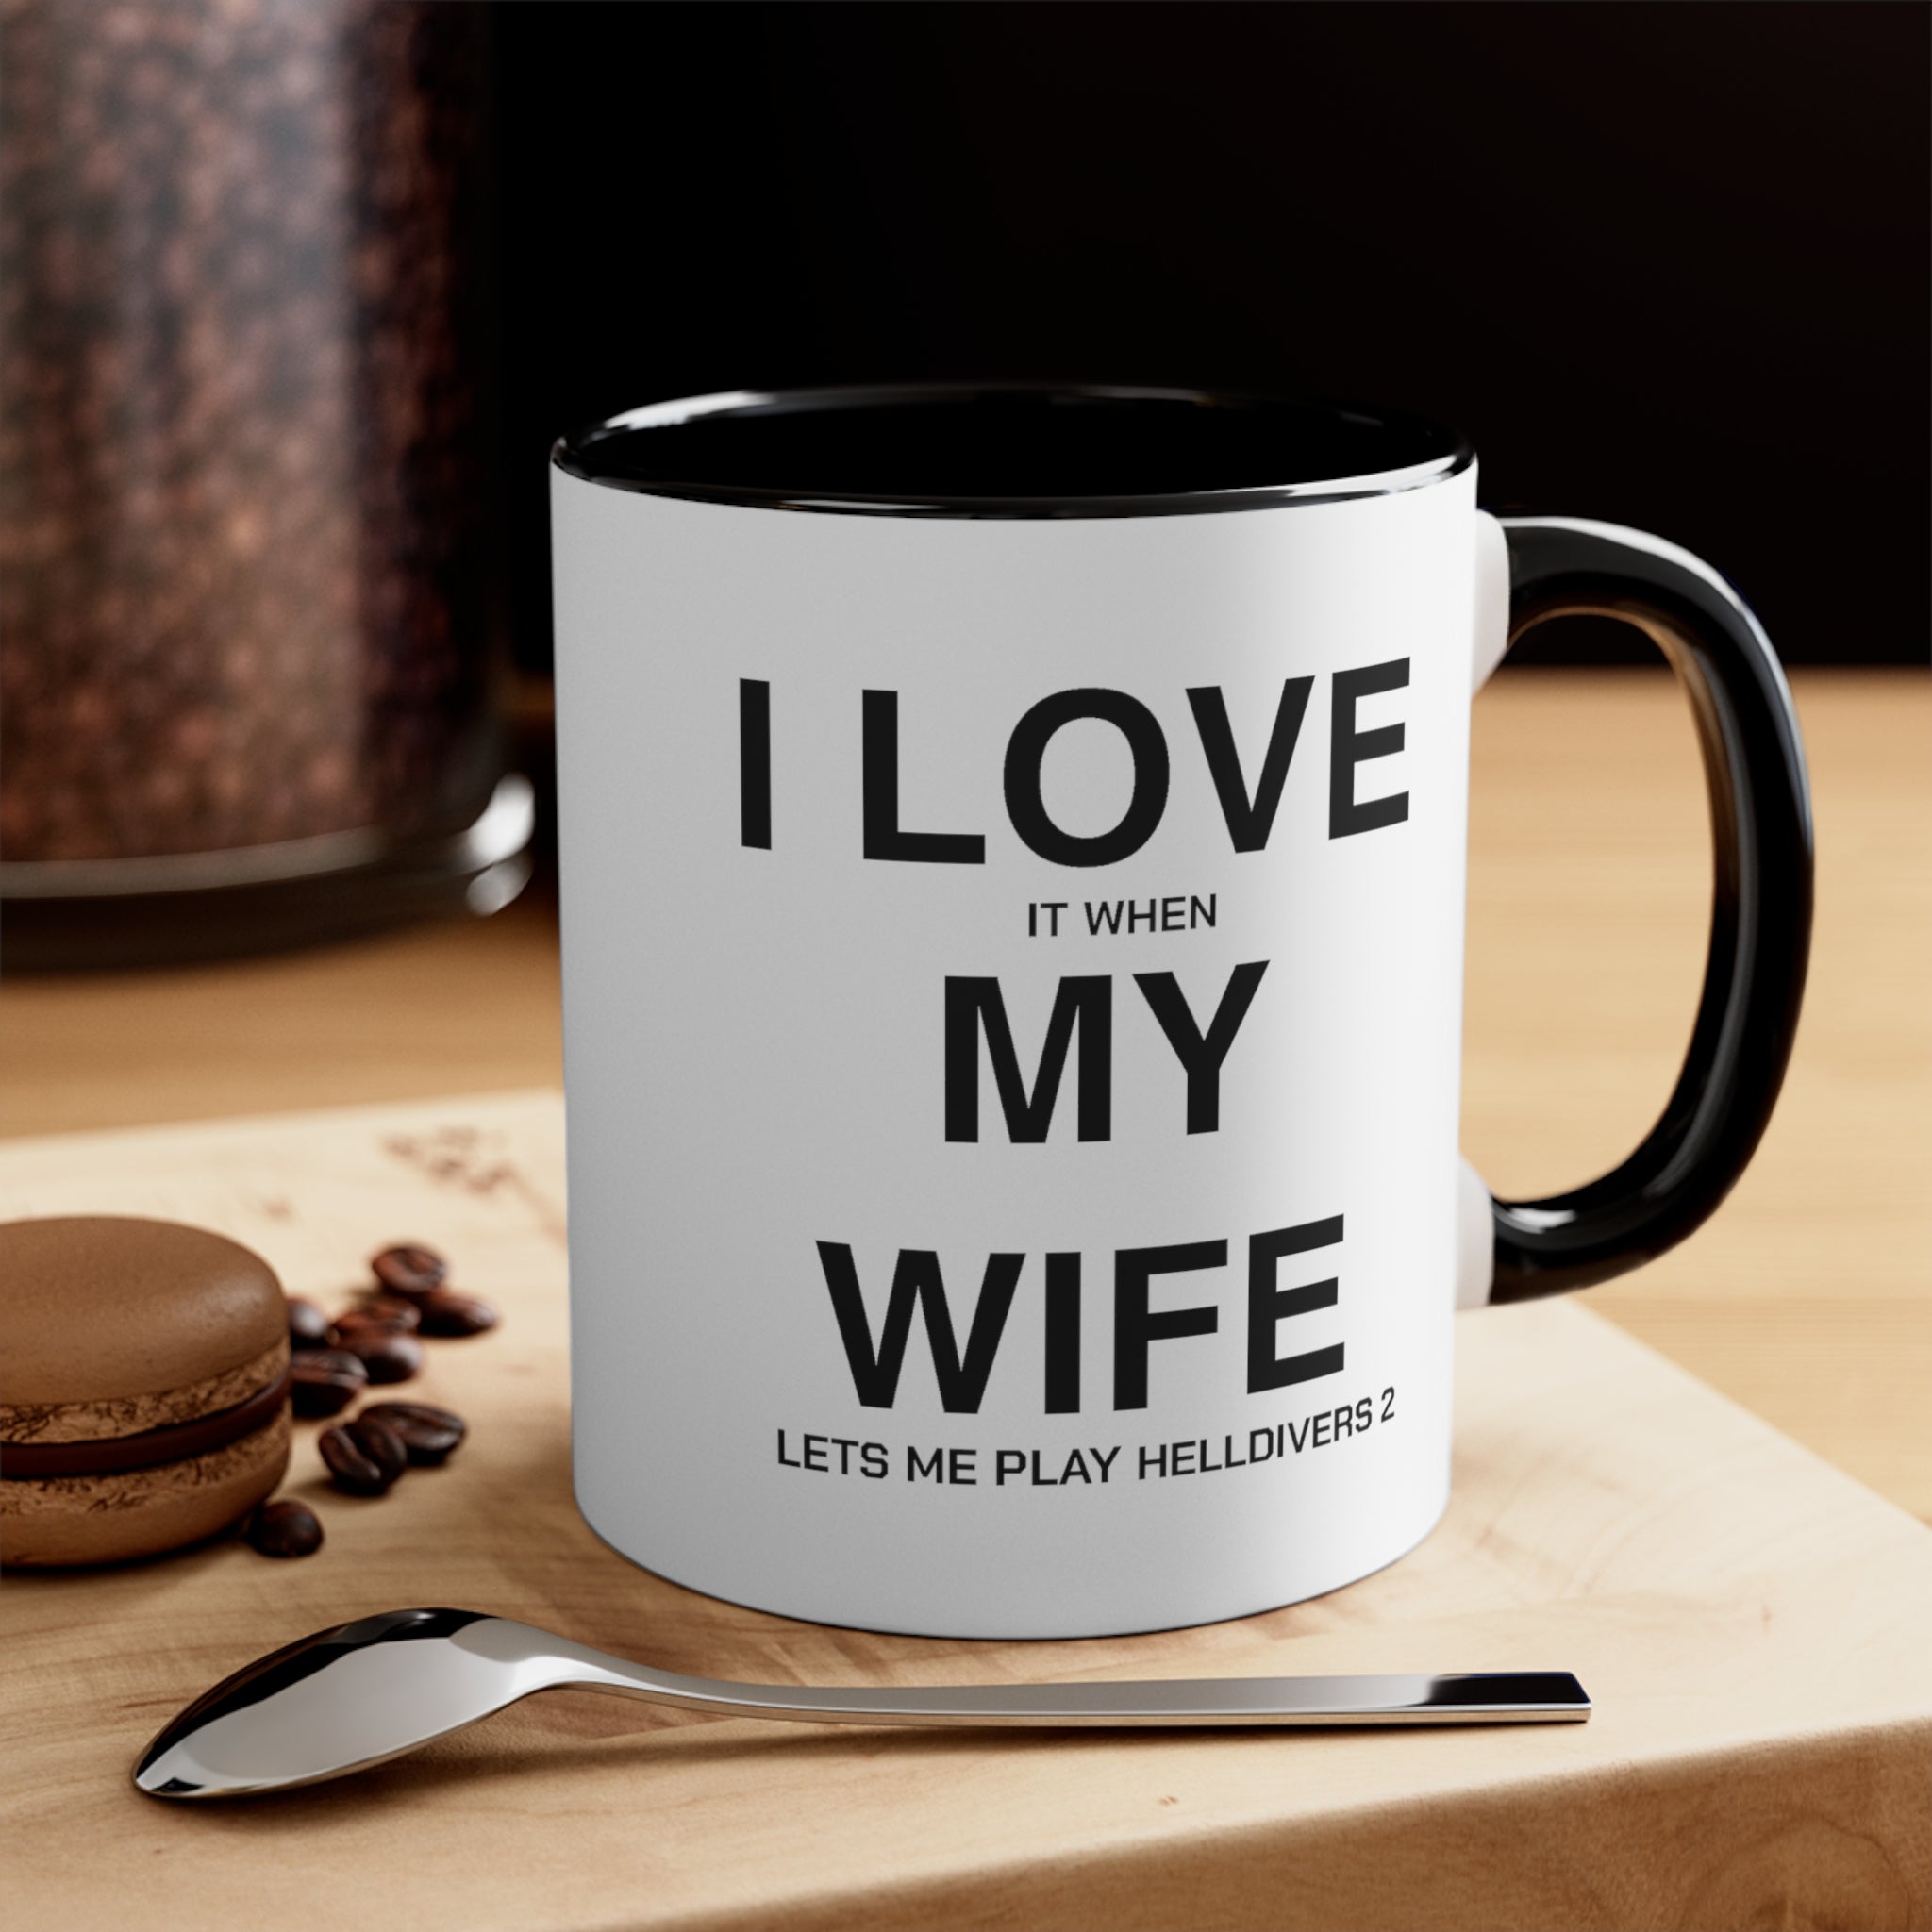 Helldivers 2 Wife Coffee Mug, 11oz I Love It When My Wife Let Me Play Helldivers 2 Gift For Husband Funny Joke Comedy Helldivers Cup Humor Humour